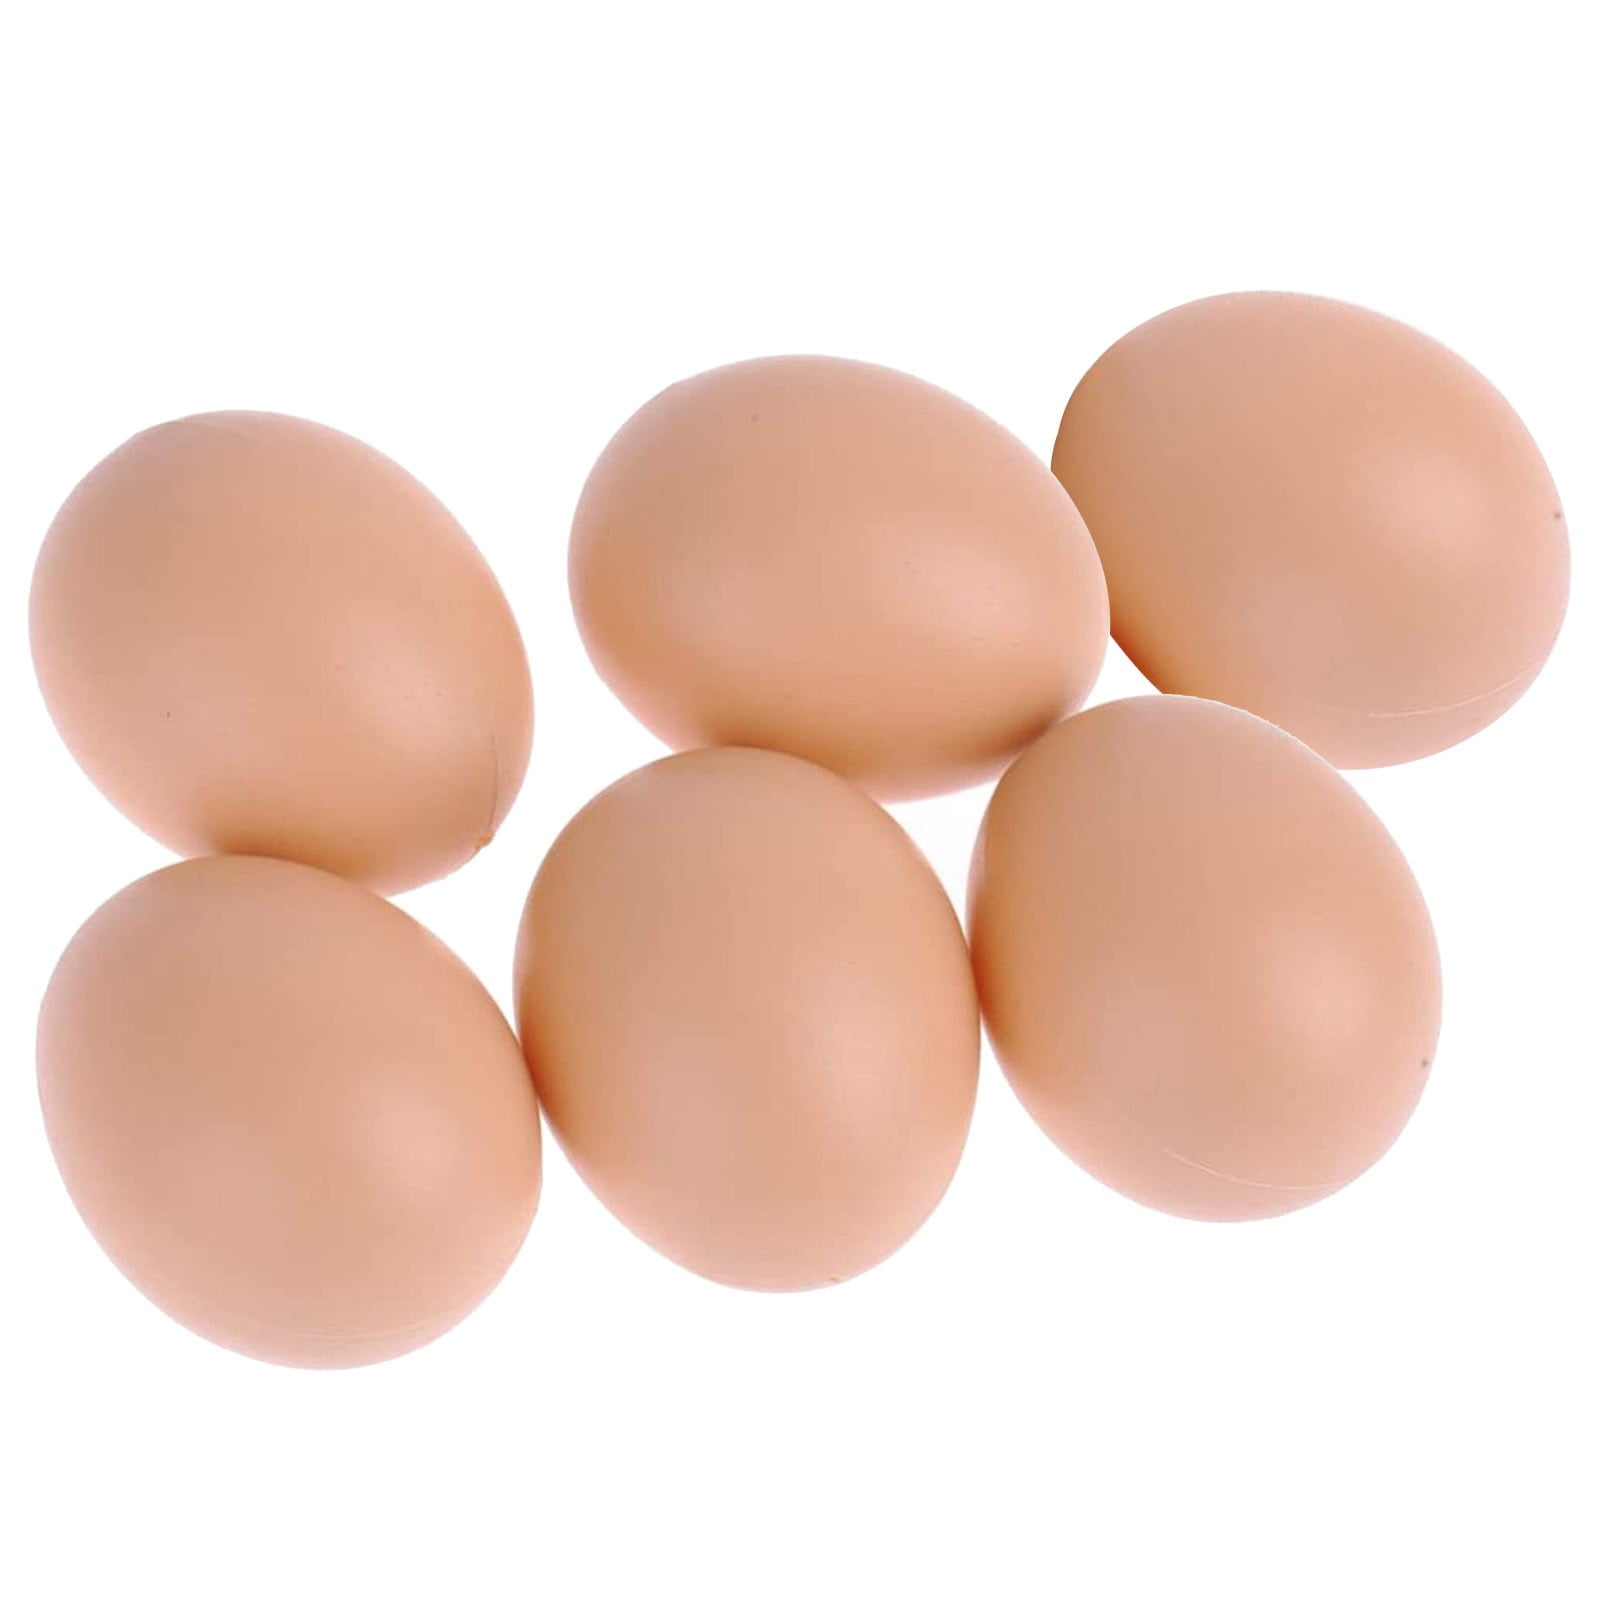 Kitchen Artificial Eggs Play Poultry 5PCS Plastic Home Props Fake Food 